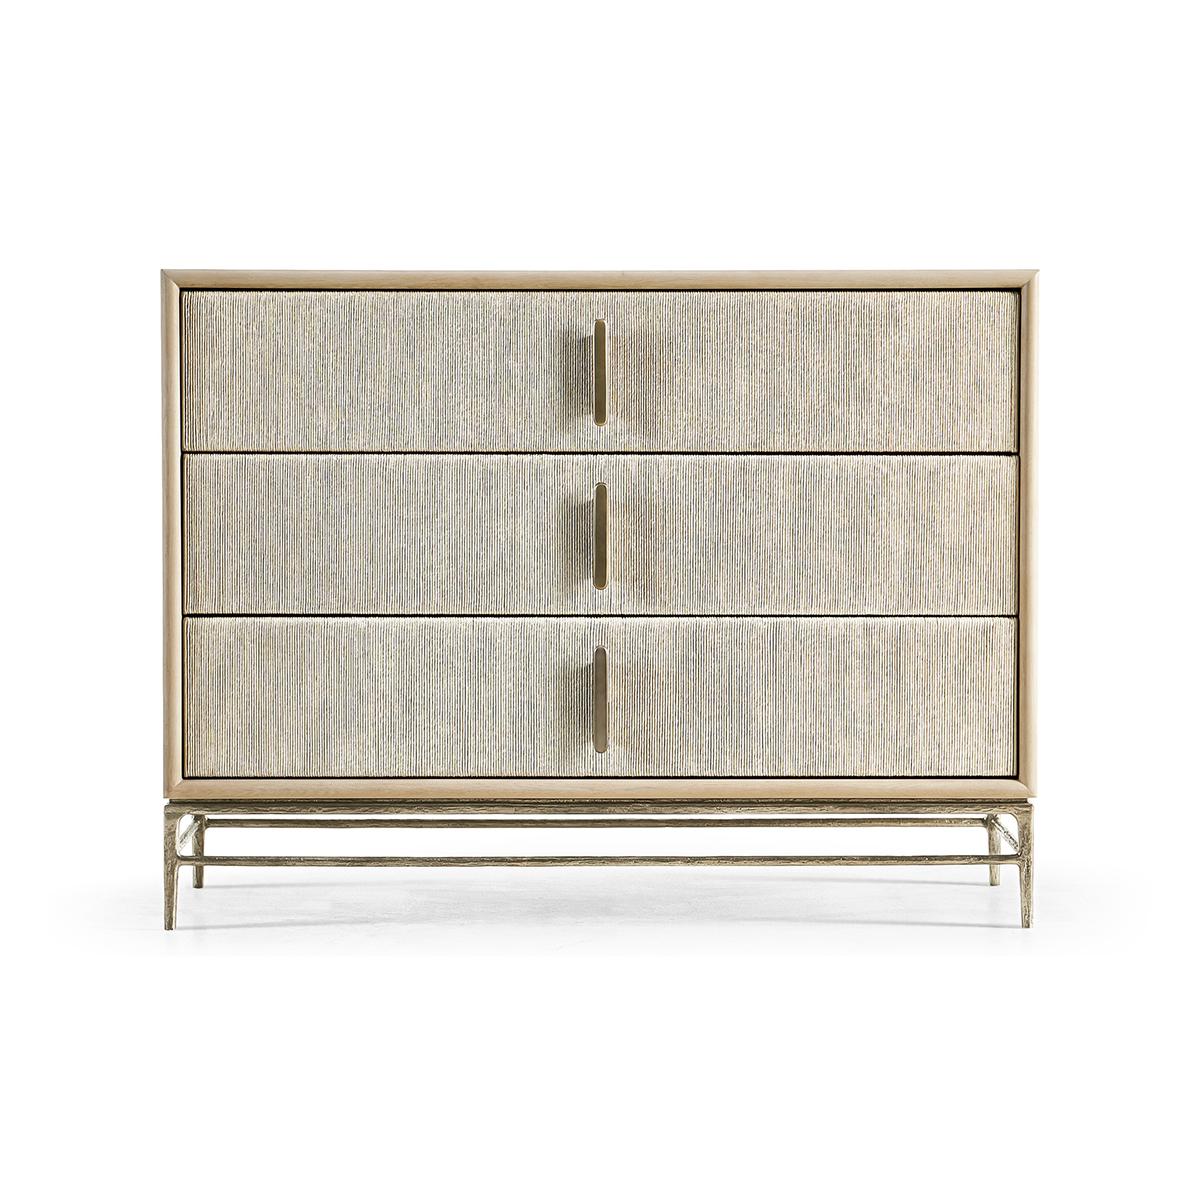 Modern Danish Chest of drawers, the stylish design, replete with three Danish cord-wrapped drawer fronts and bleached oak veneers adds style to the classic tone and feel of contemporary vision without shortcuts.

Cast stainless steel base and